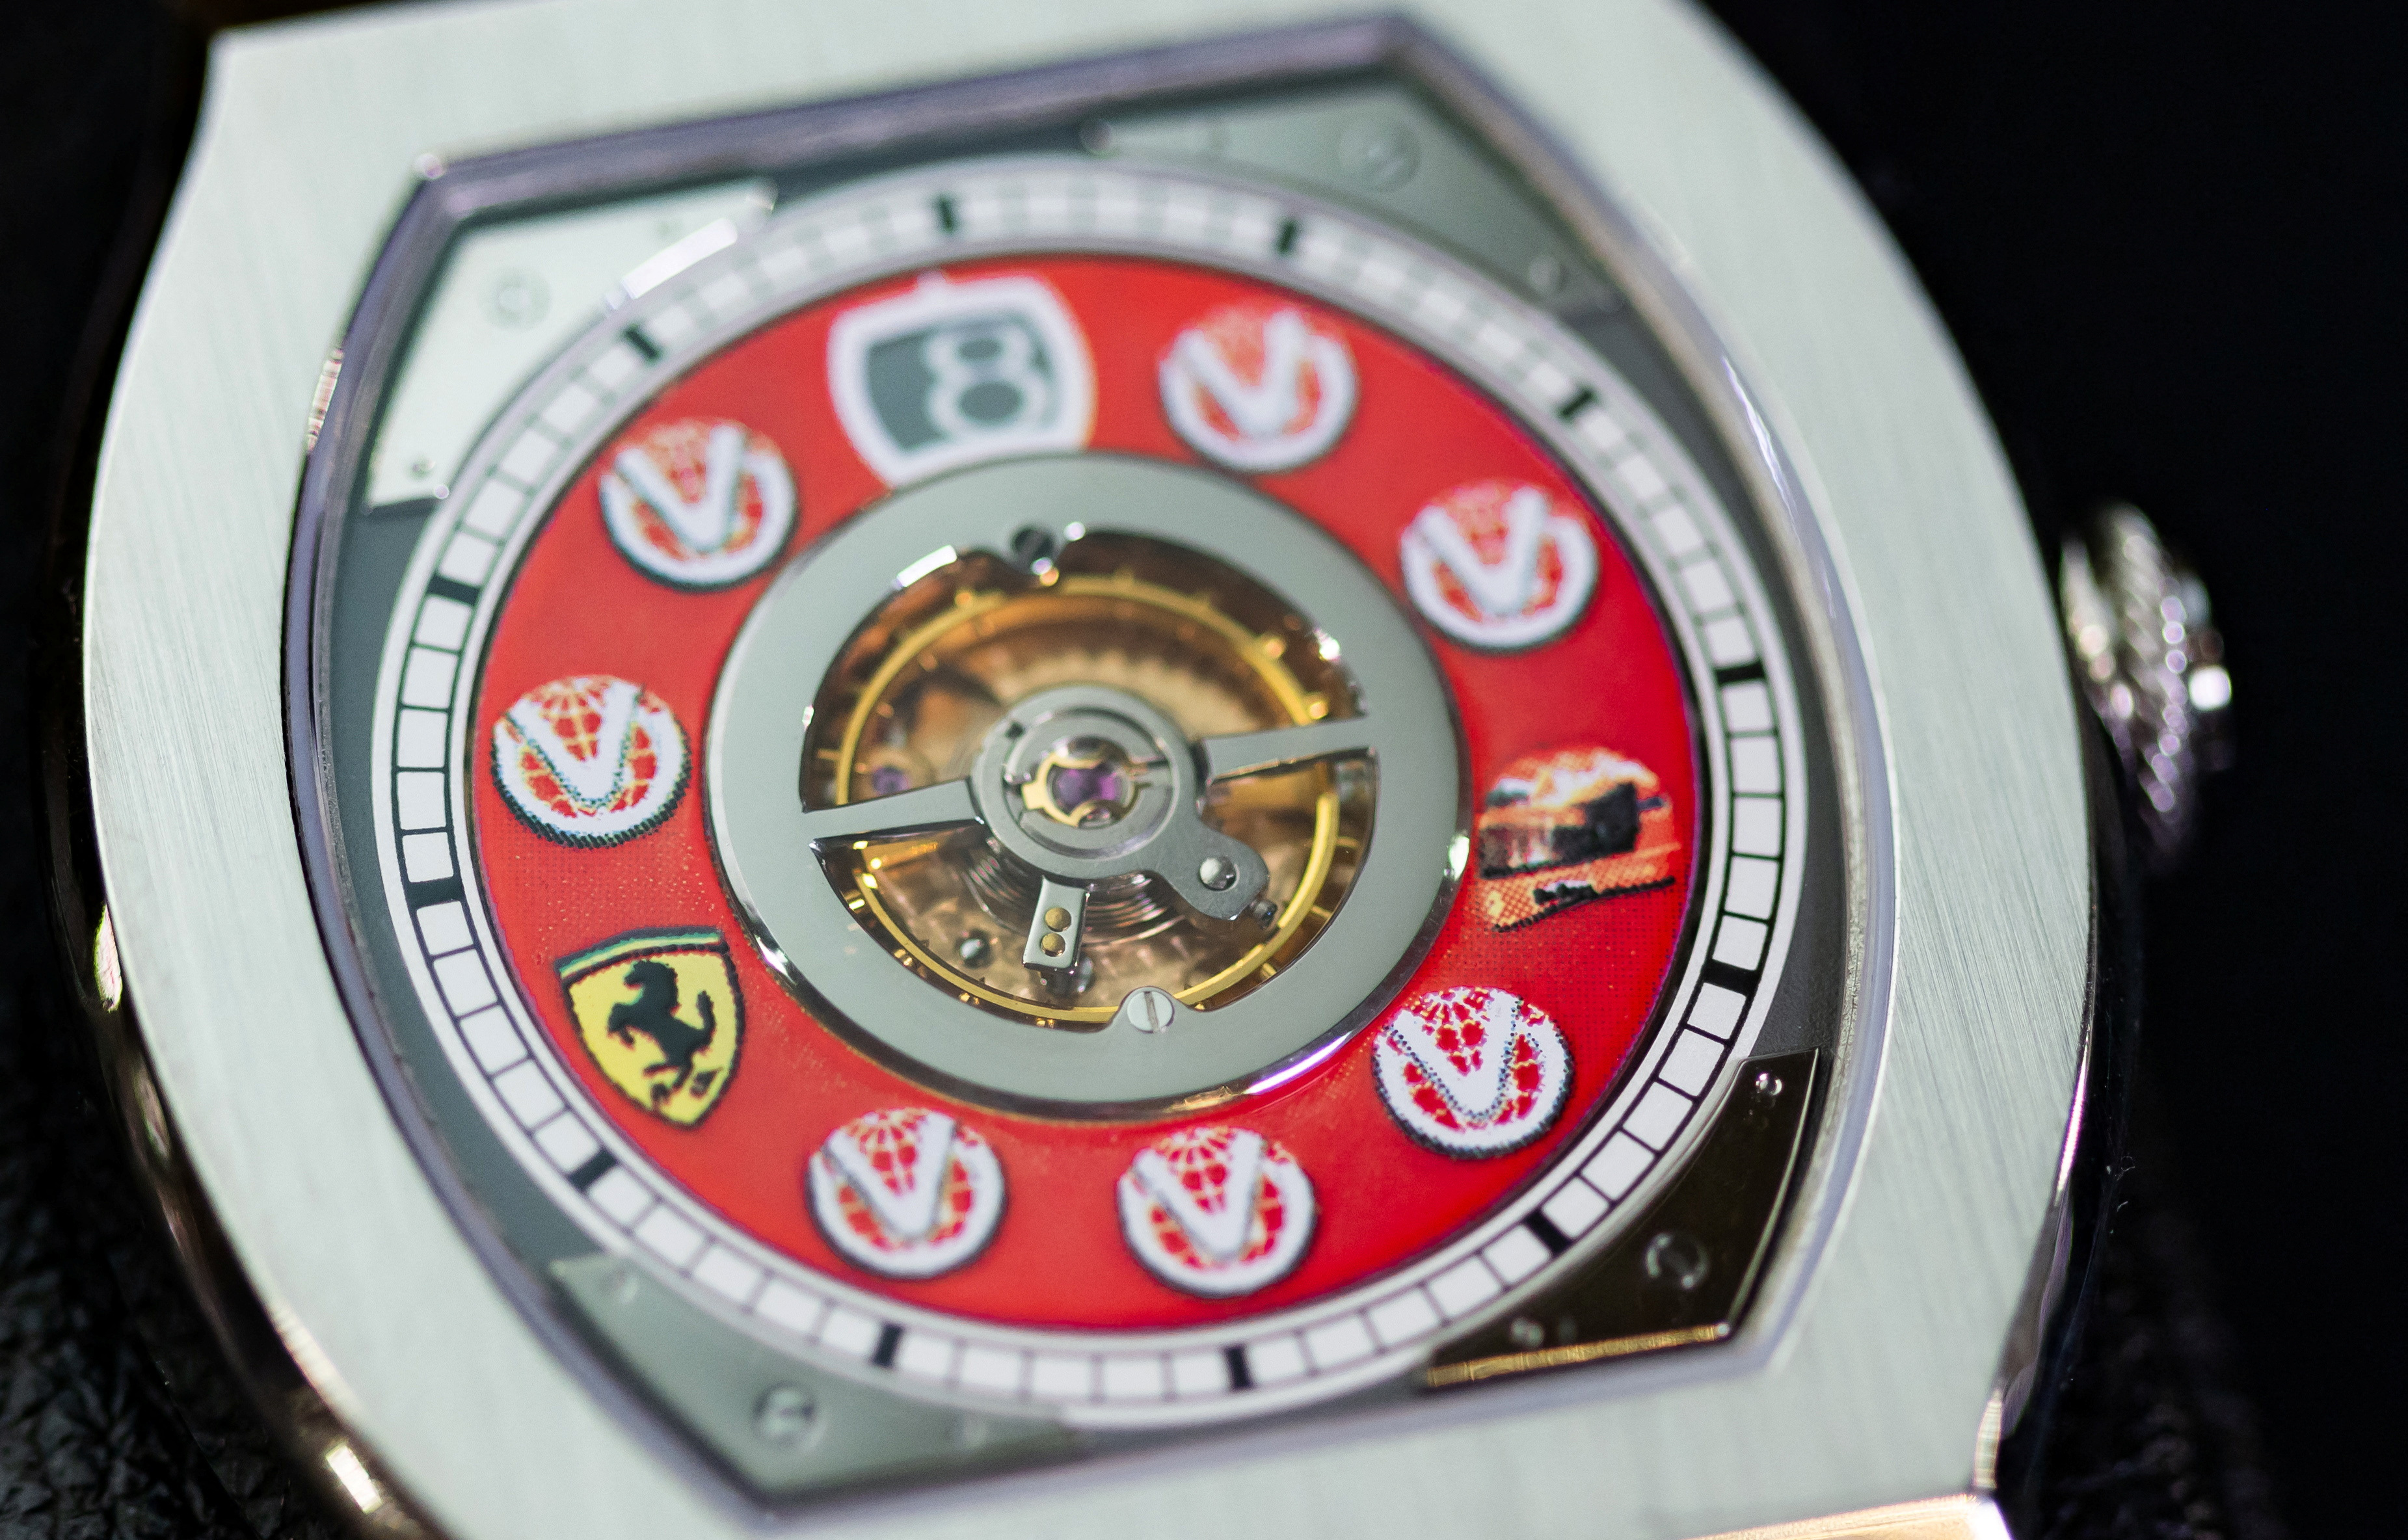 Watches from the collection of Michael Schumacher, ahead of an auction during a Christie's media preview in Geneva